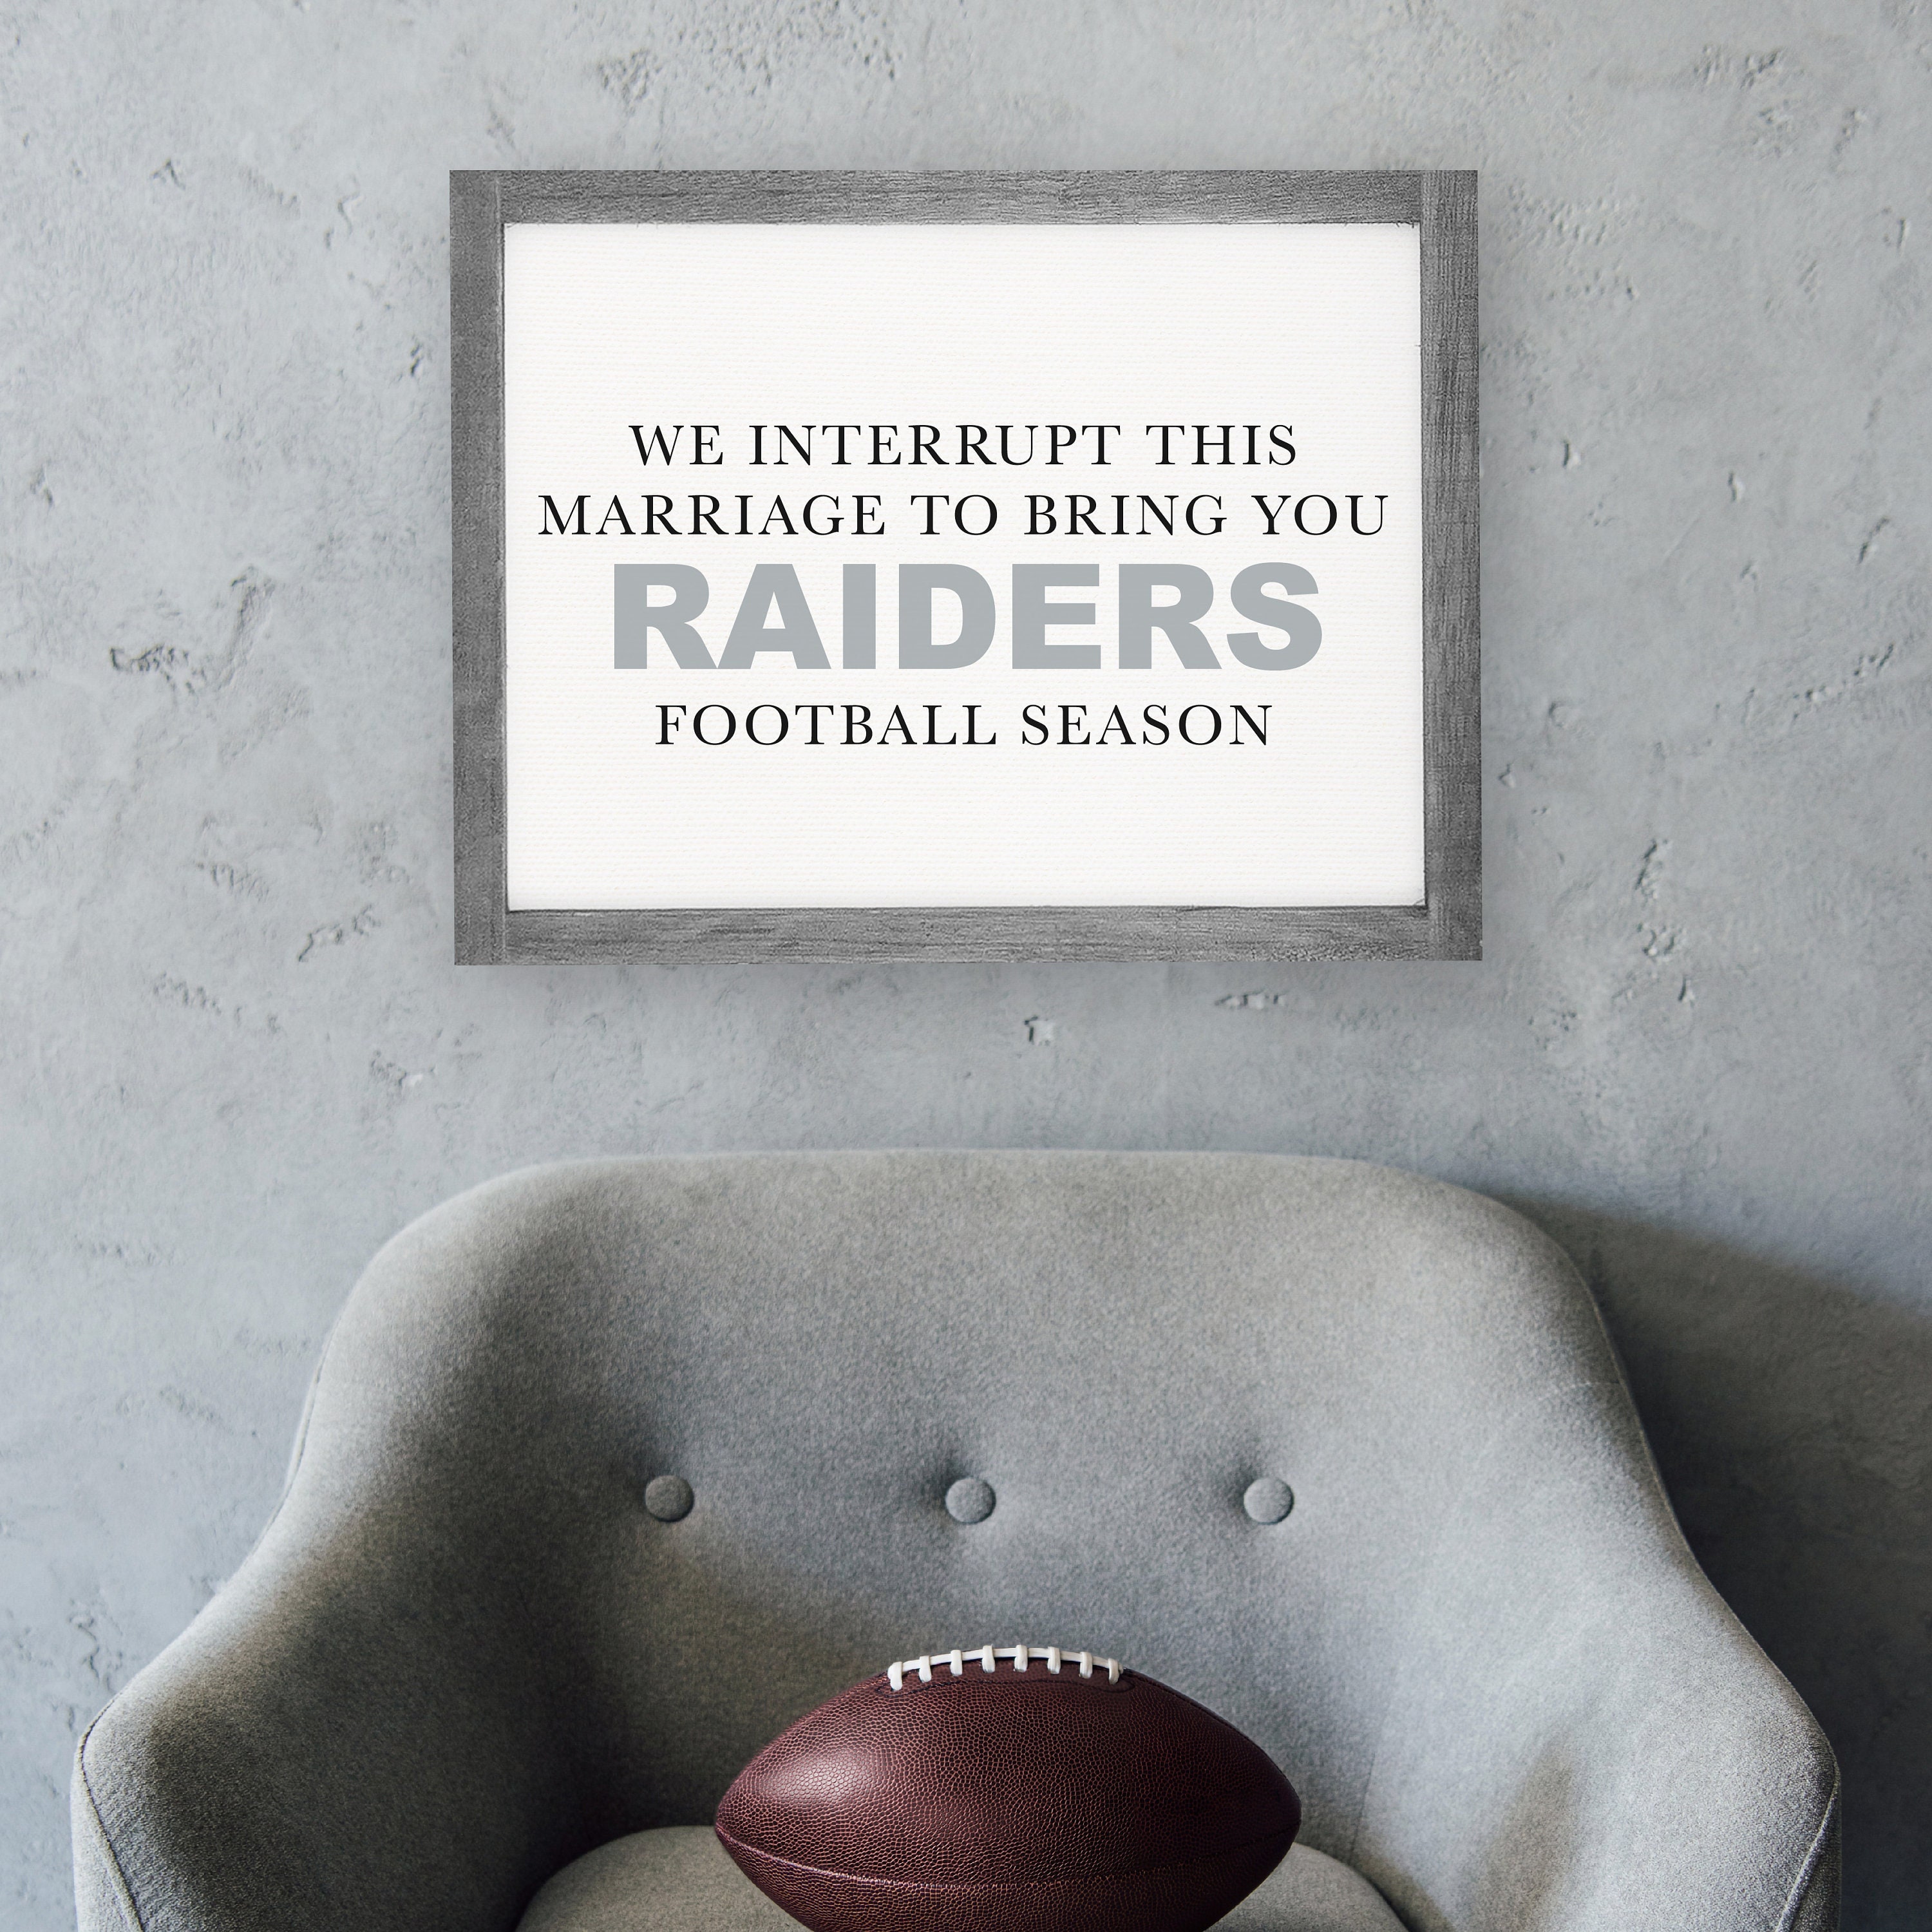 Las Vegas Raiders Merchandise, It's no surprise, Las Vegans LOVE the  Raiders! 😍 Make a splash at your next sporting event, concert, or  conference by having custom merchandise from the